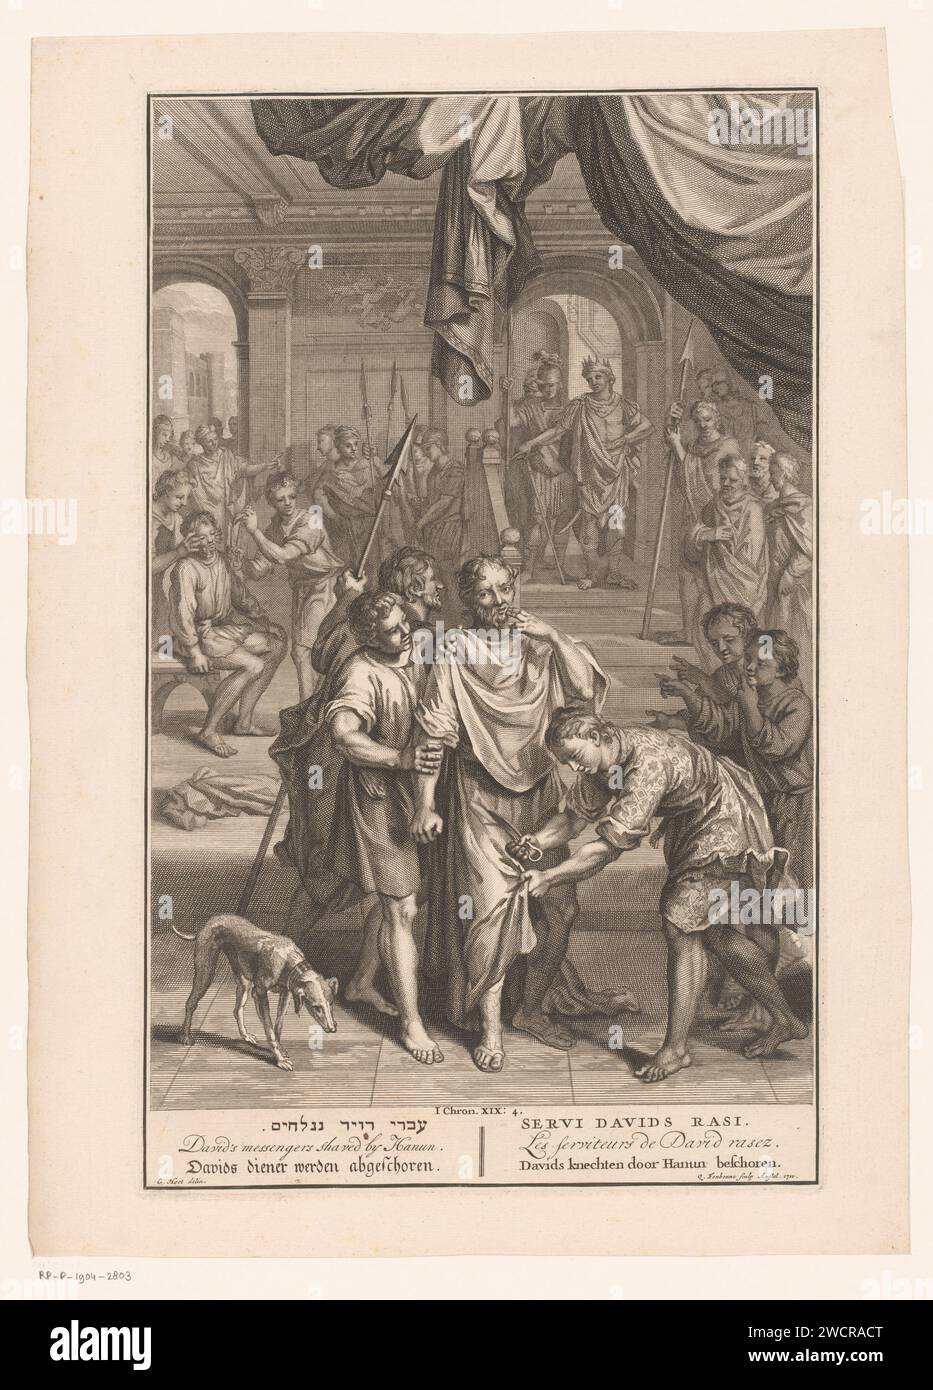 Davids servants at Hanun, Quiryn Fonbonne, After Gerard Hoet (I), 1720 - 1728 print  Amsterdam paper etching / engraving Hanun, king of the Ammonites, mistreats David's messengers: their beards are shaven off and their clothes are cut off Stock Photo